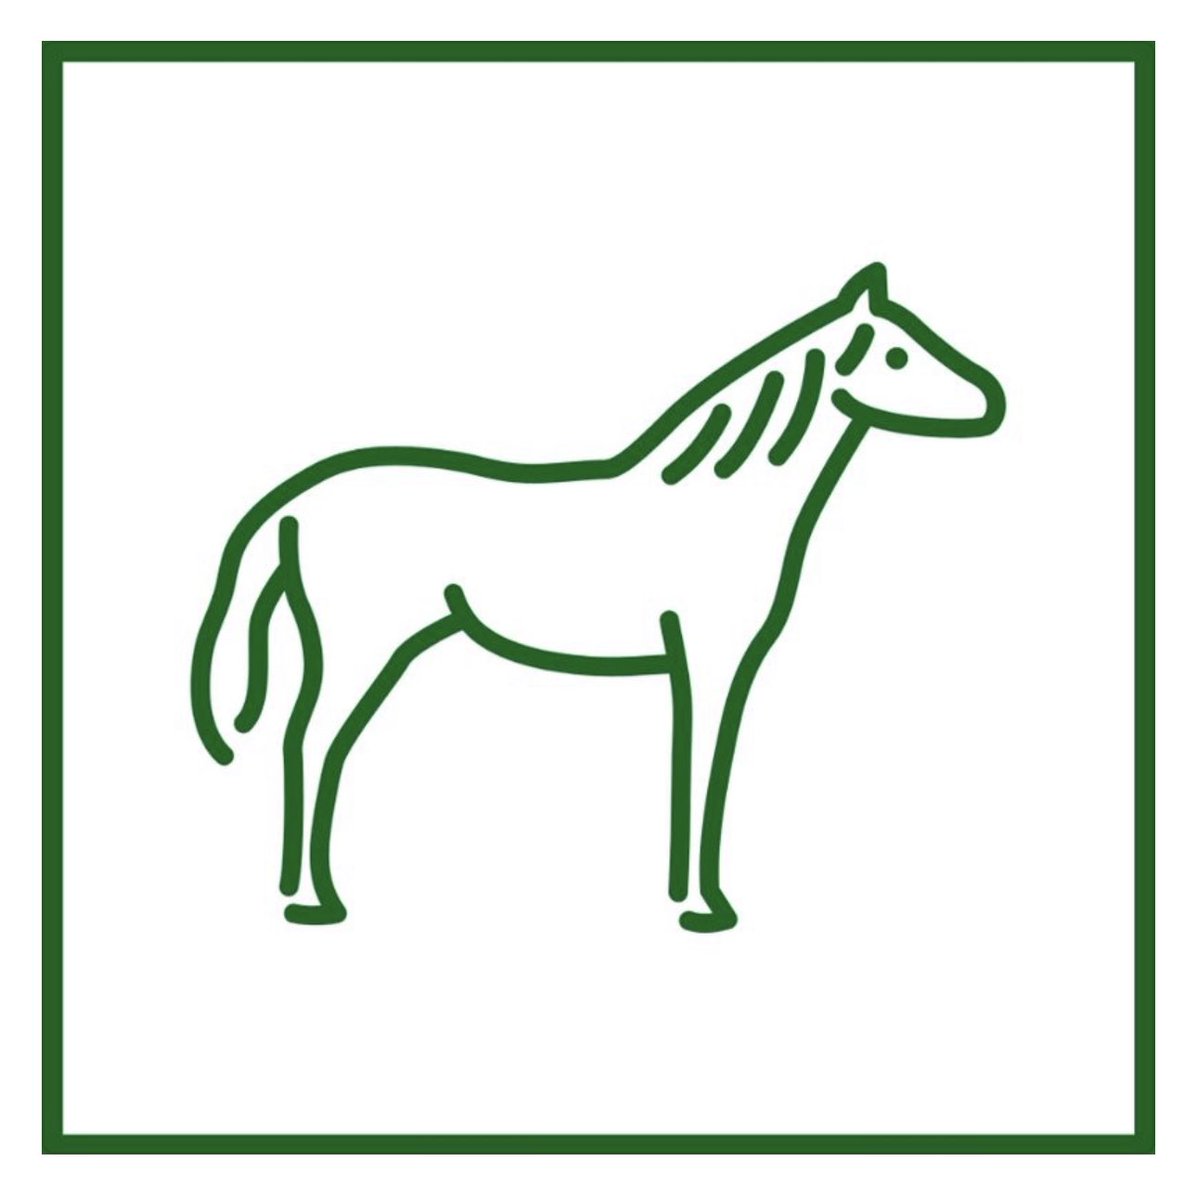 We are loving our new logo - so exciting how things are progressing with our community ….. thanks for liking our social media !! instagram.com/horseworlddotuk

#Equestrian #horse #pony #equine #family #equestrianmarketplace #equineservices #horselife #ponylife #equestriancommunity